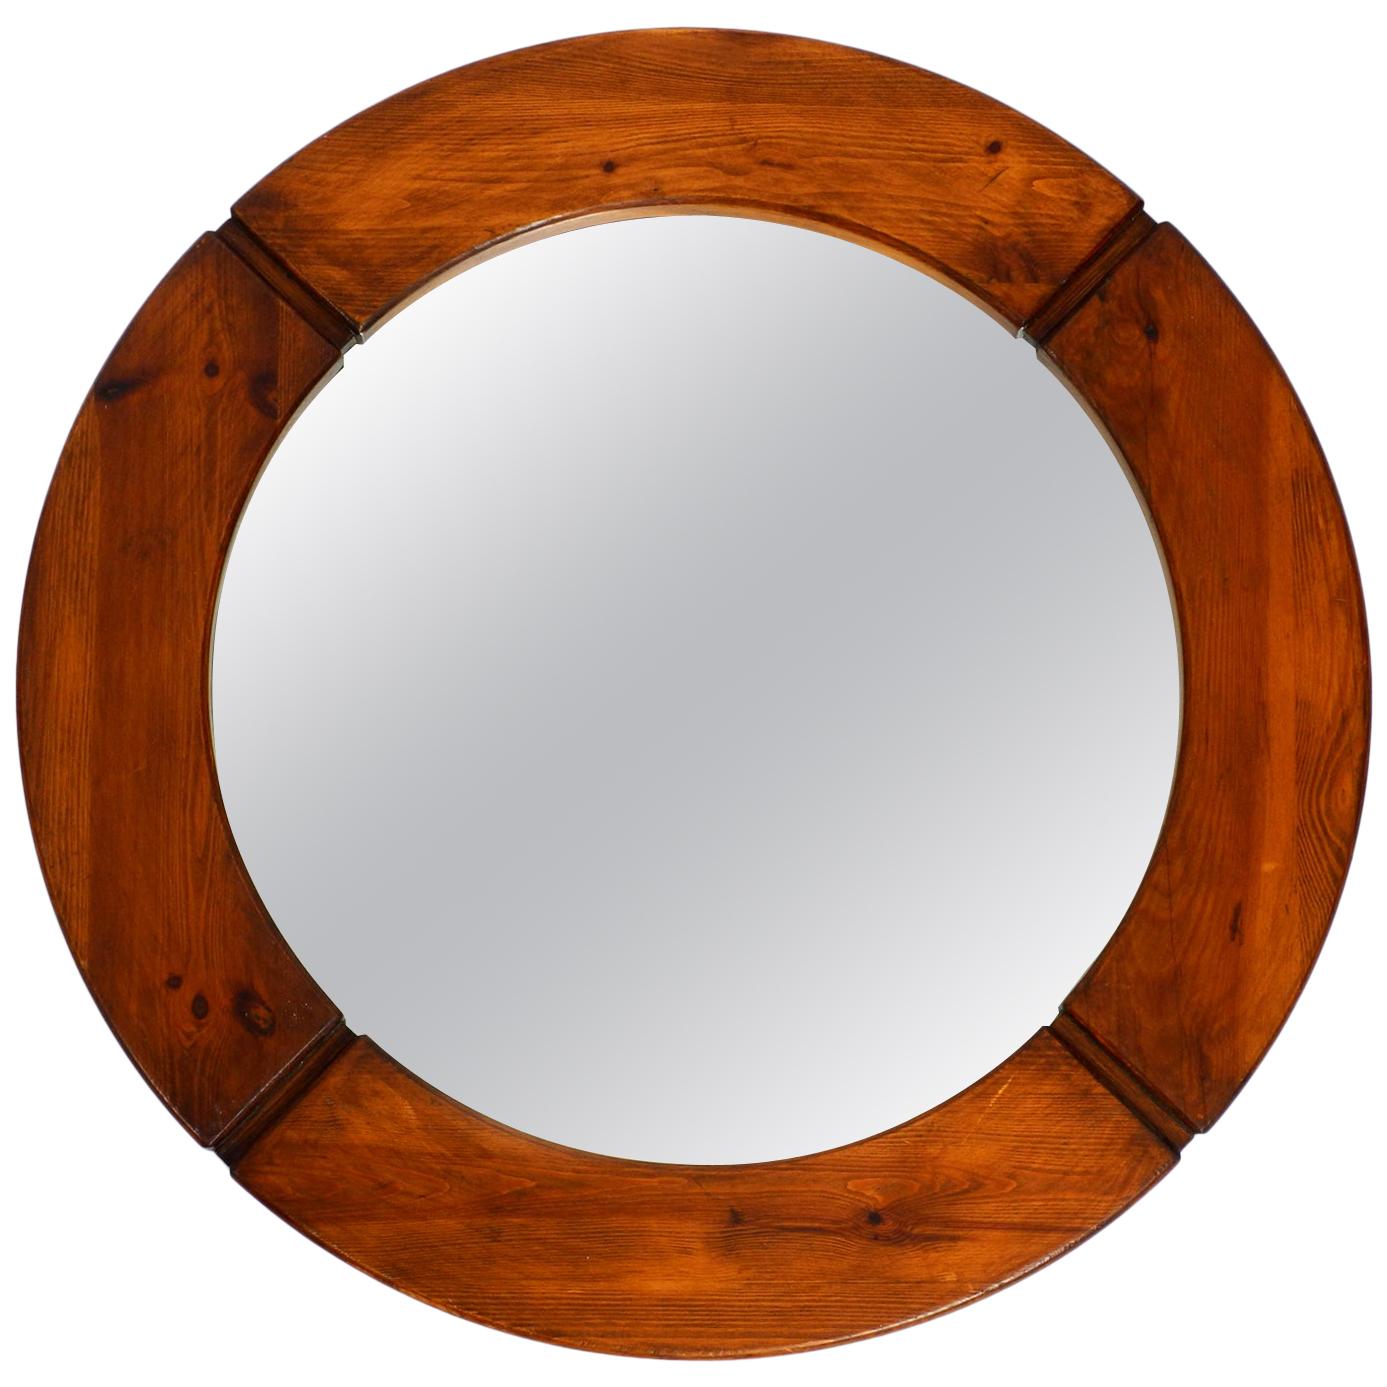 Large 1960s Wood Wall Mirror by Pedersen and Hansen for Masonite, Sweden